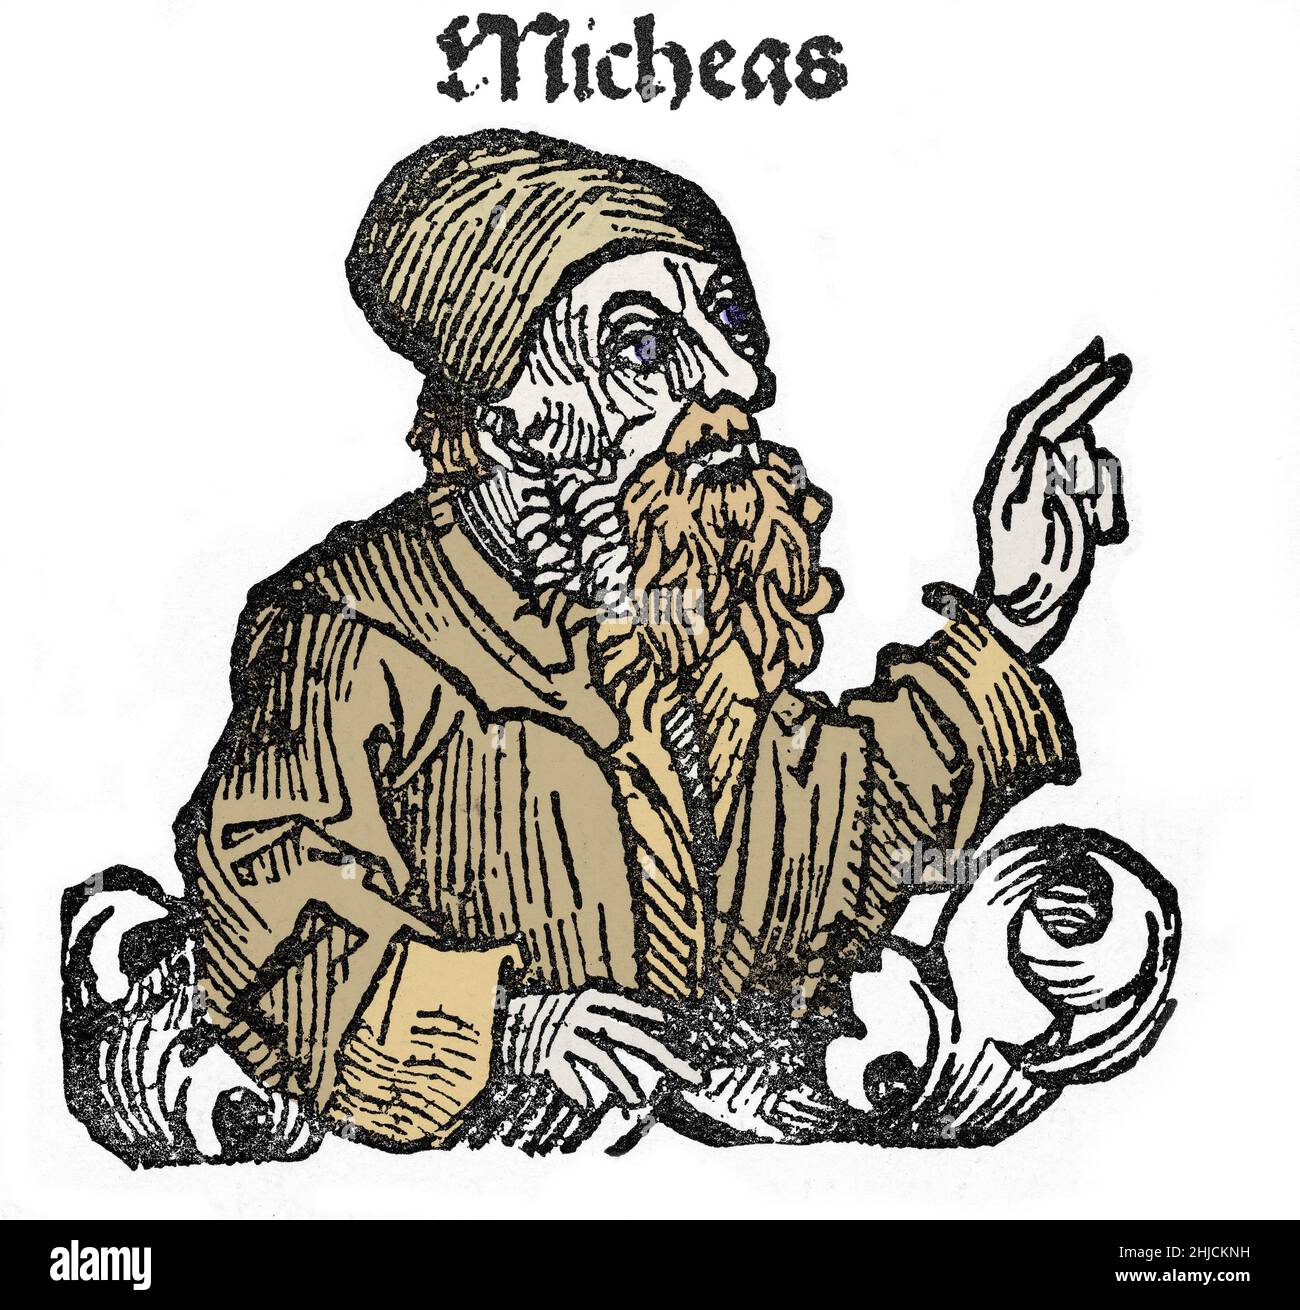 Colorized illustration of Micheas, from the Nuremberg Chronicle, circa 1493. Micheas, or Micah, was an 8th century prophet. He is the author of the Book of Micah of the Hebrew Bible. Stock Photo